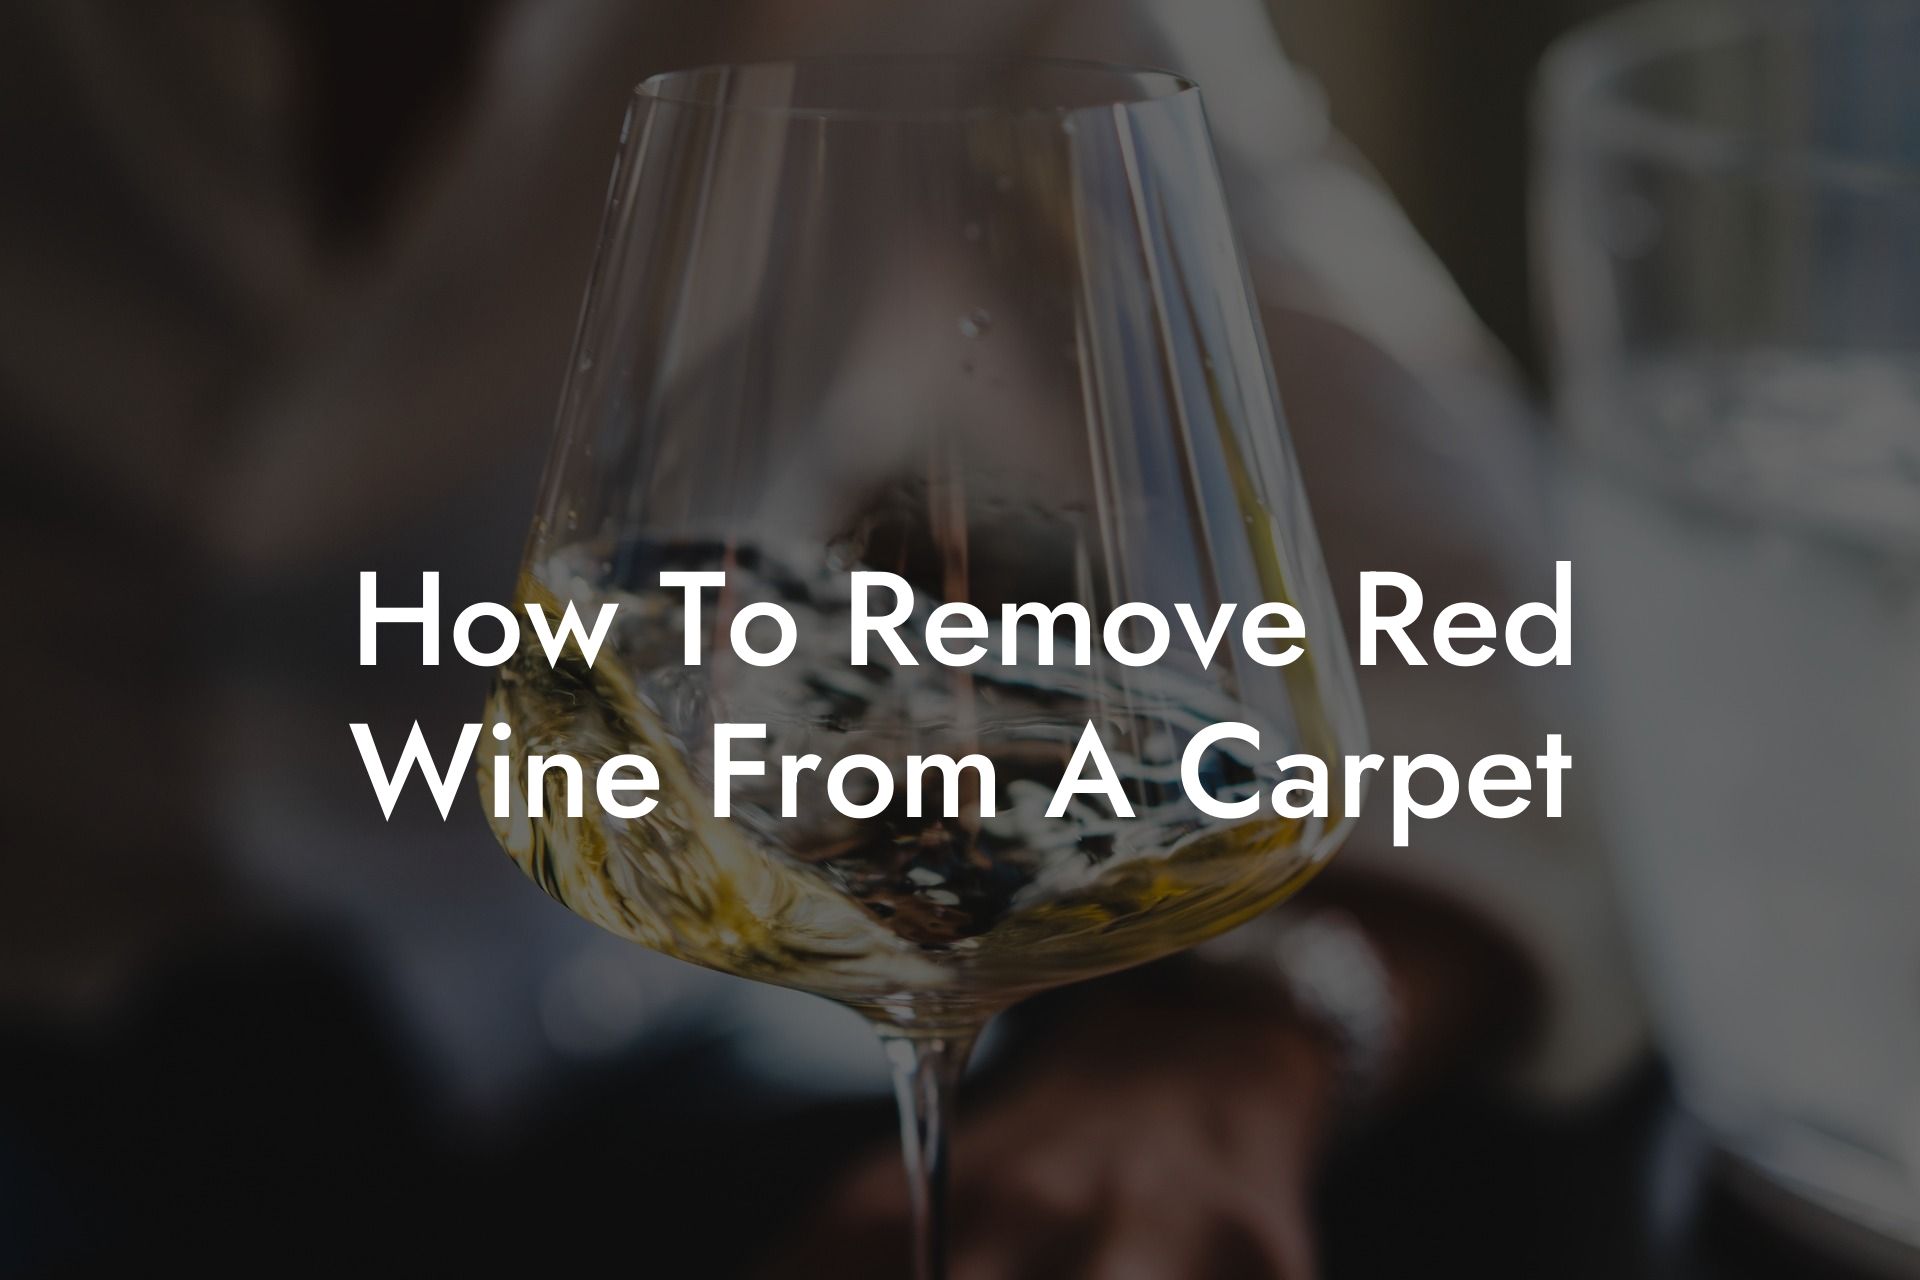 How To Remove Red Wine From A Carpet